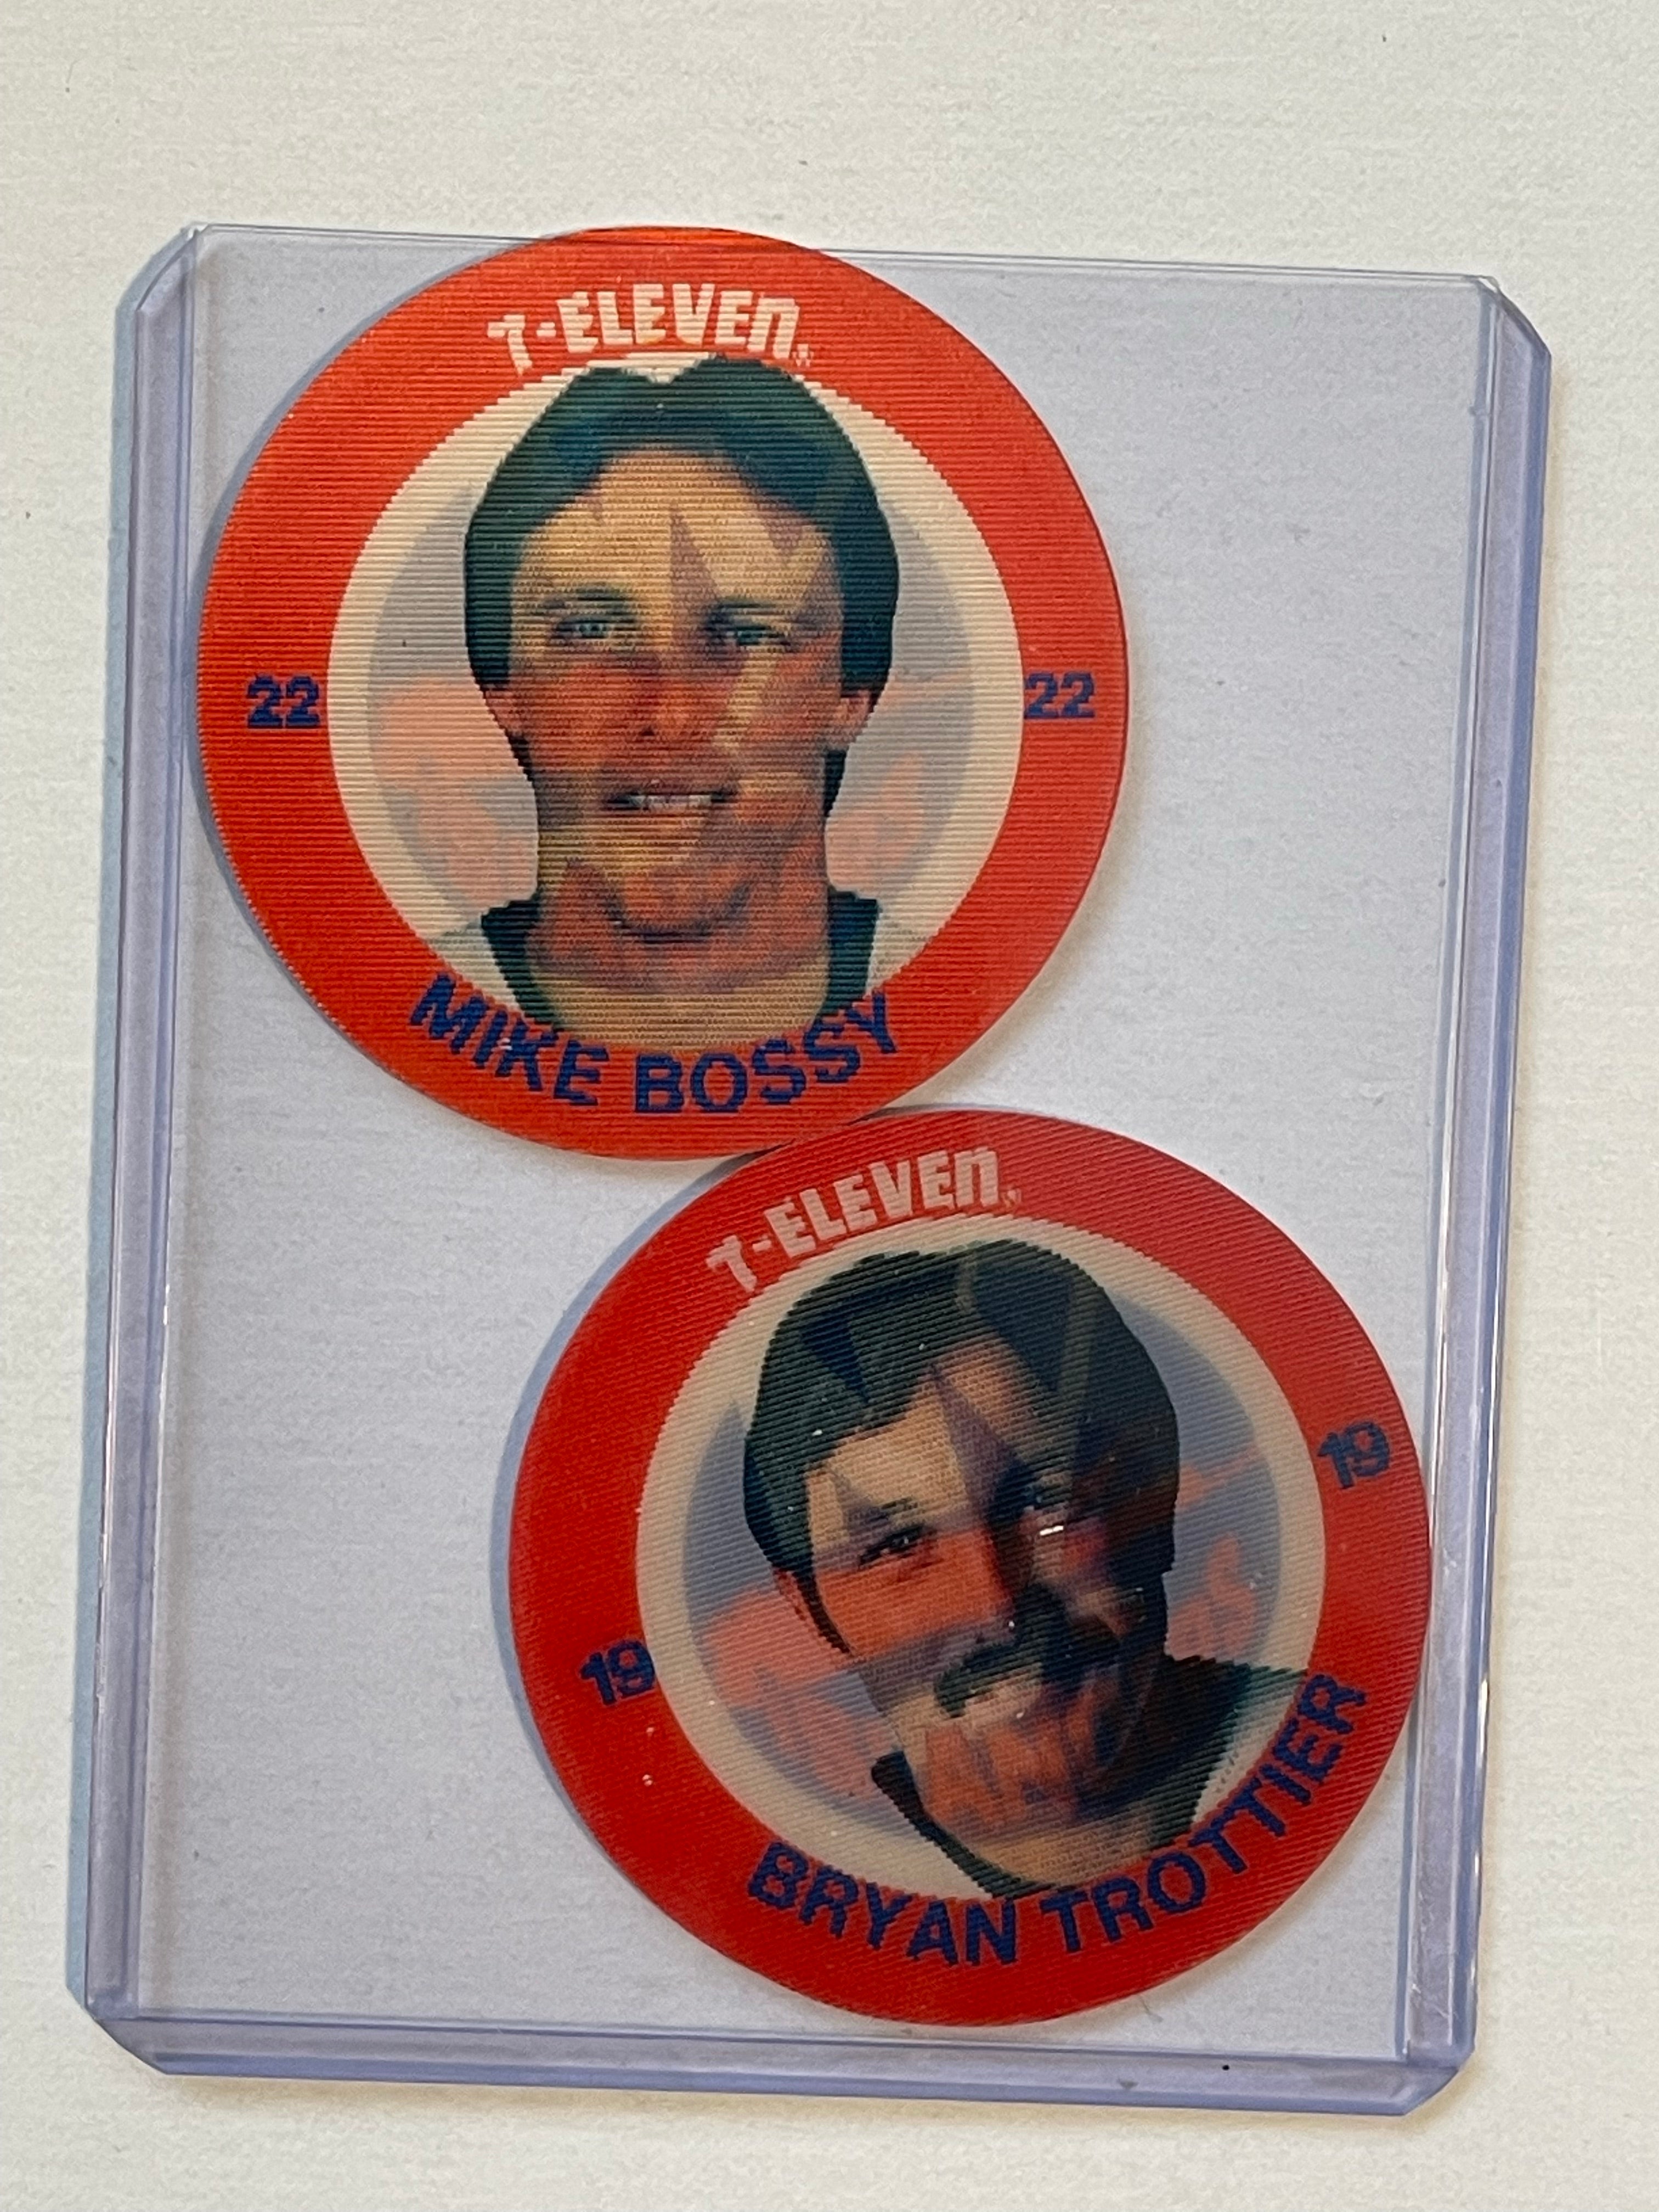 Mike Bossy and Bryan Trottier 7-11 discs 1985